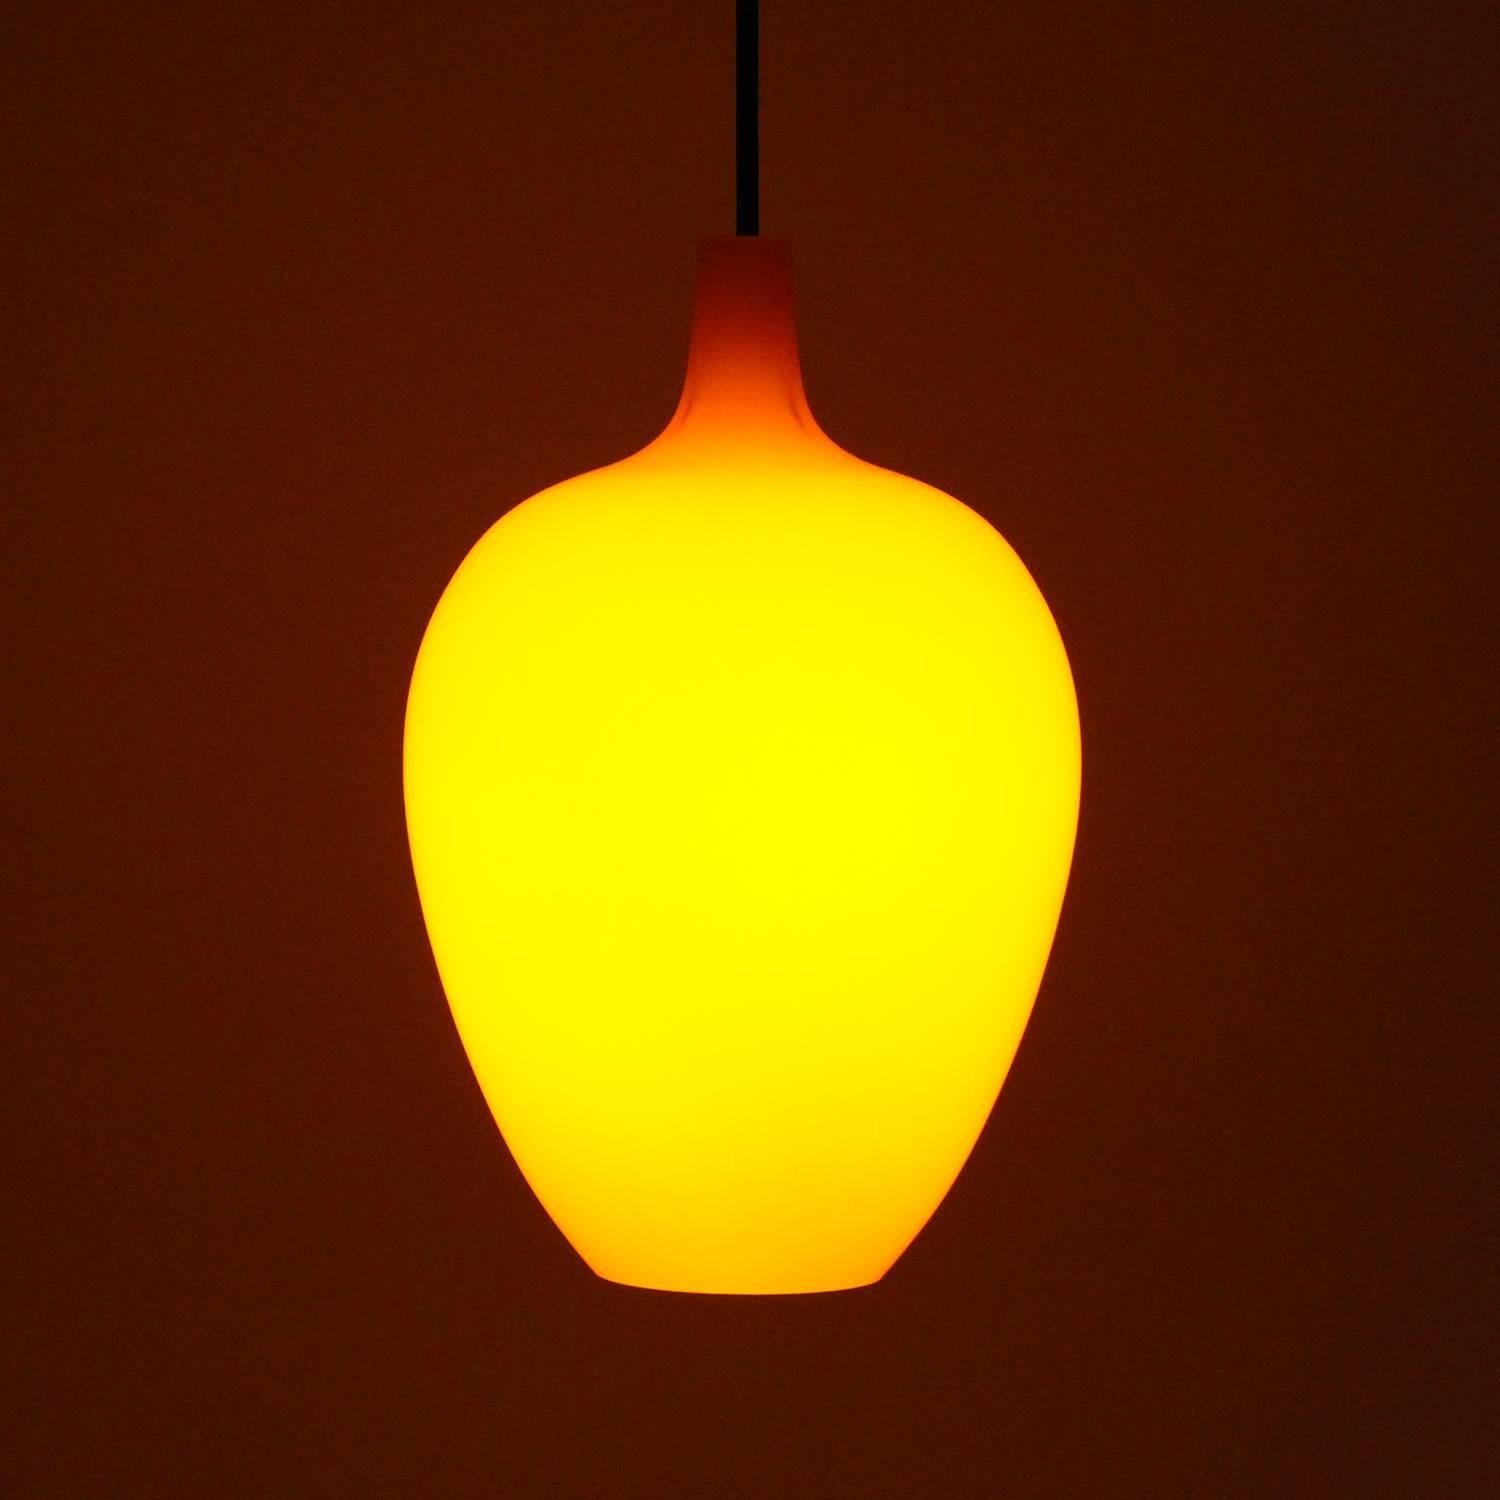 POMPEI, orange blown glass pendant light by Jo Hammerborg in 1963 and produced by Fog & Mørup in collaboration with Holmegaard Glassworks - truly amazing glass ceiling light in very good, near excellent vintage condition.

An elegantly shaped glass